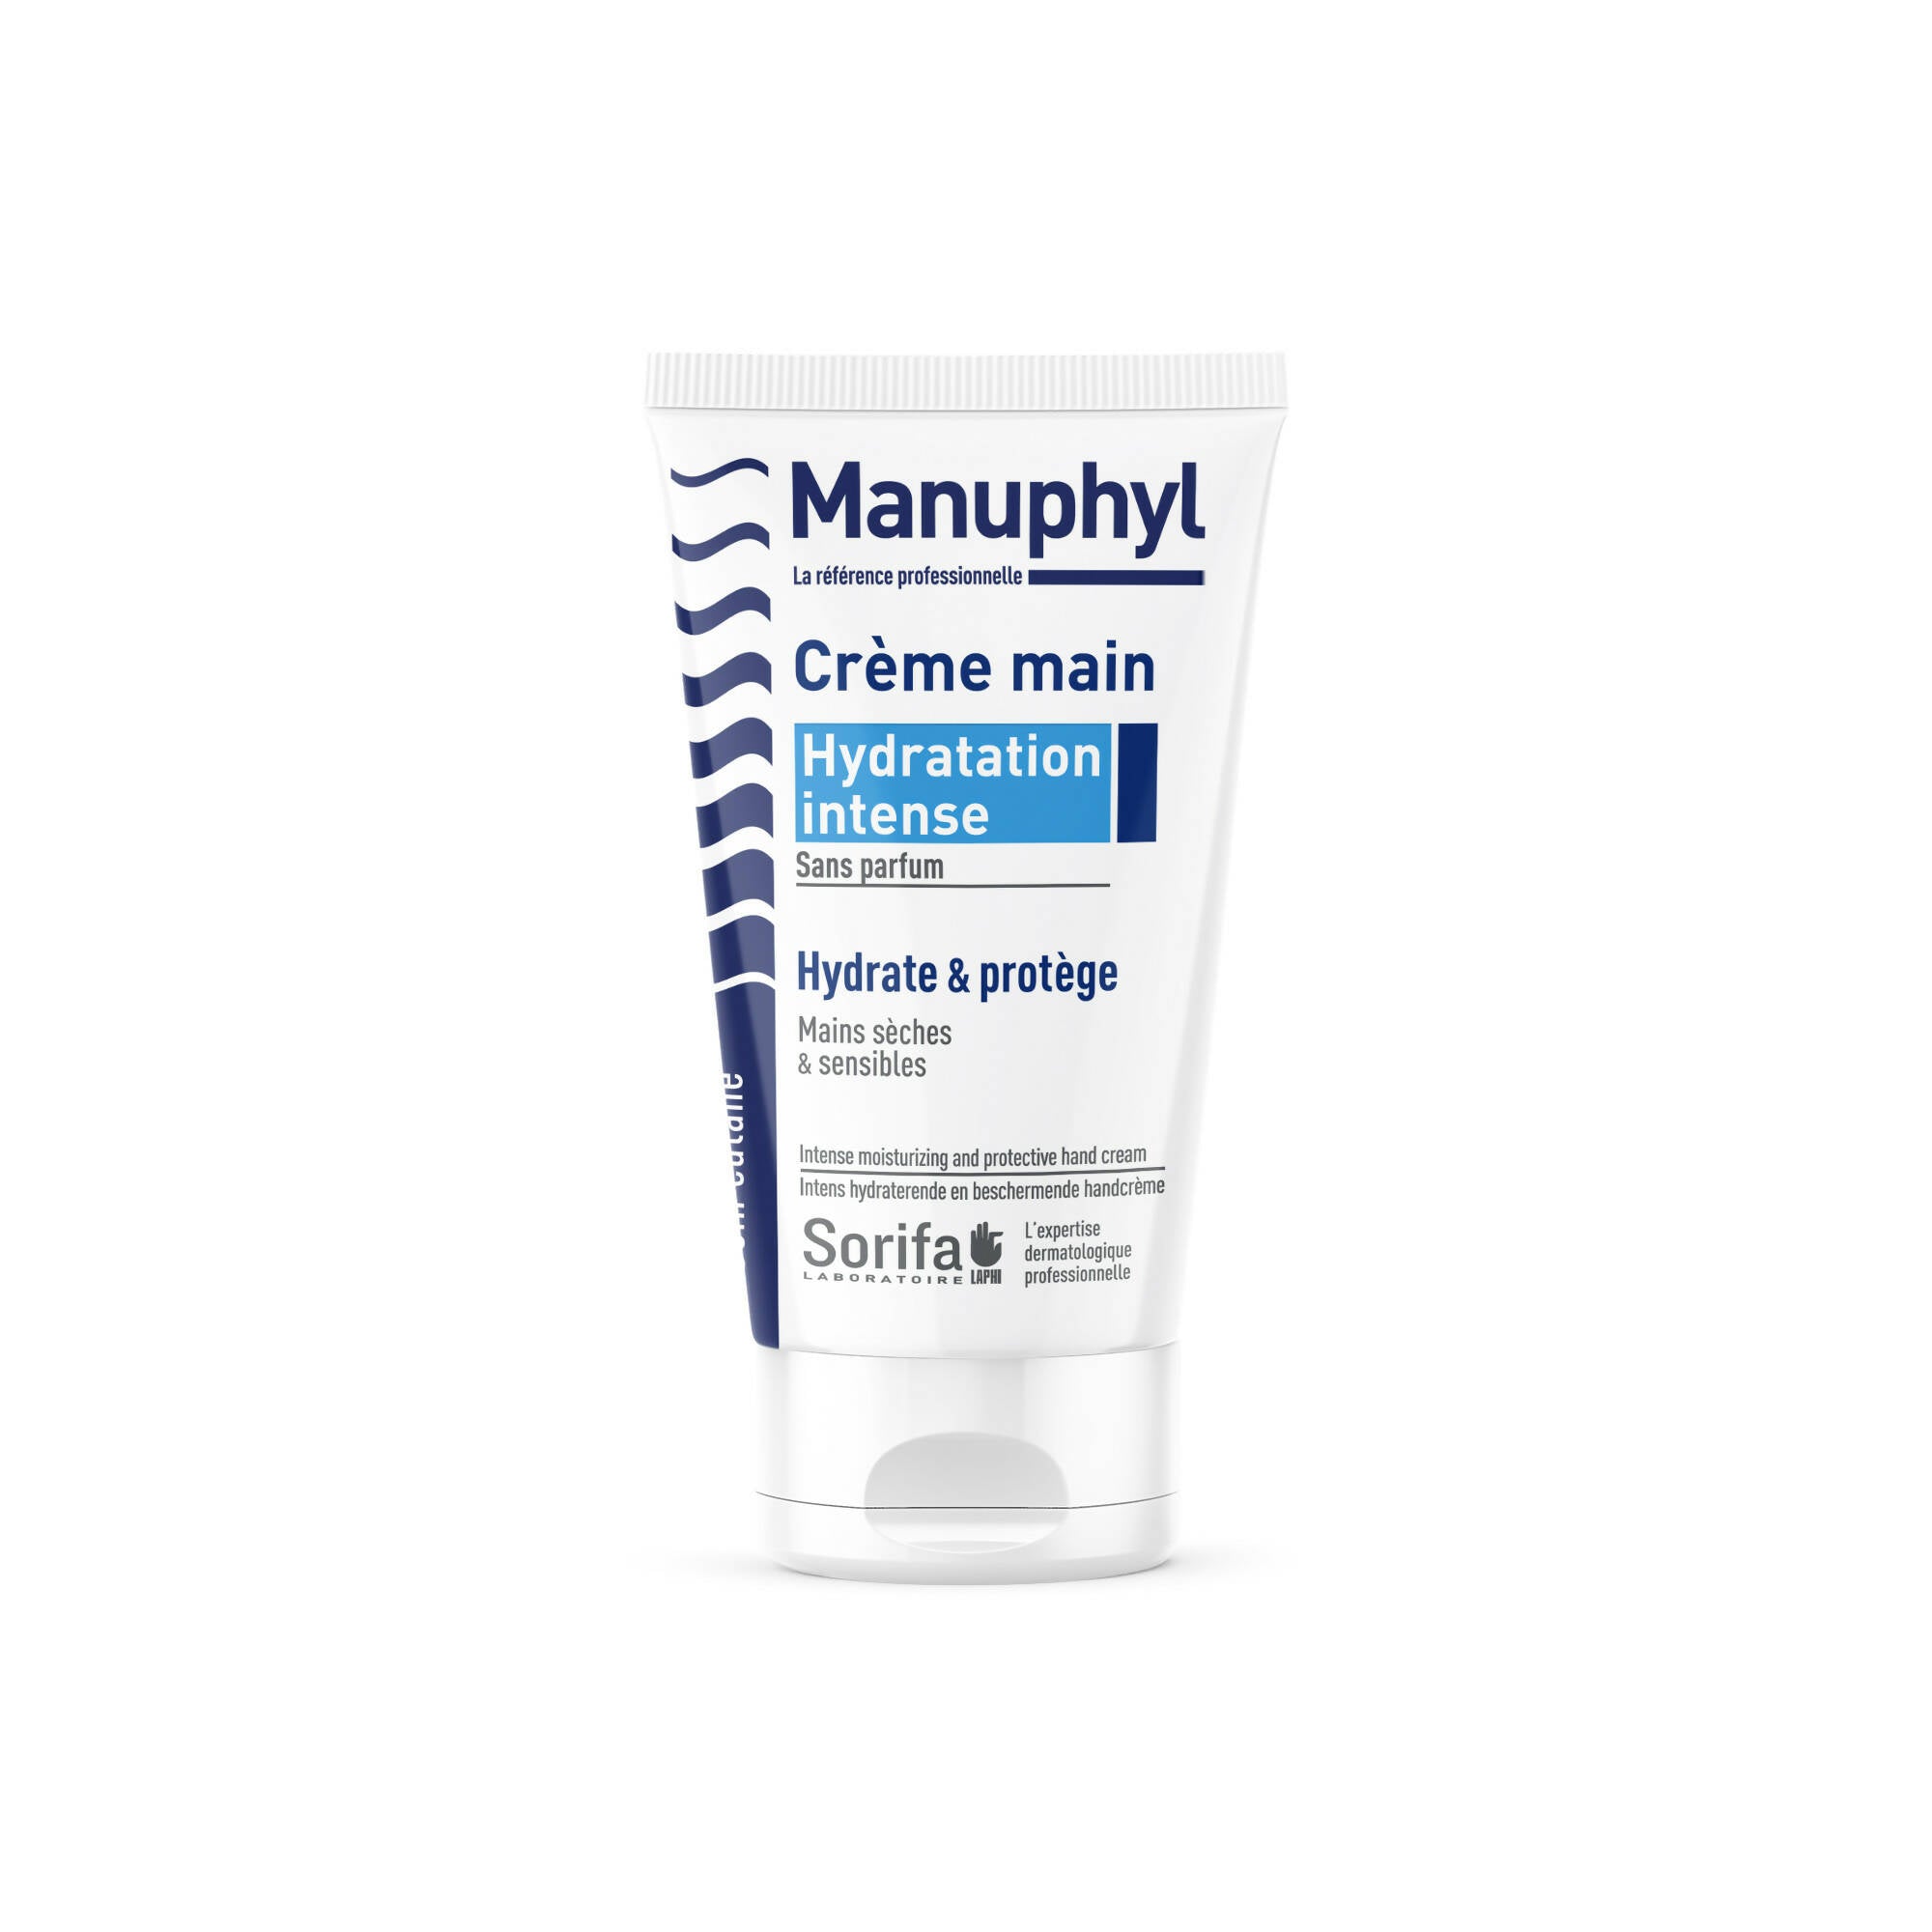 SORIFA - Complete box of 50 - Manuphyl Intense Hydration Hand Cream - Moisturizing and protective - Dry and sensitive hands - Non-greasy, fragrance-free, enriched with Allantoin and wheat proteins - 50 ml tube - 0